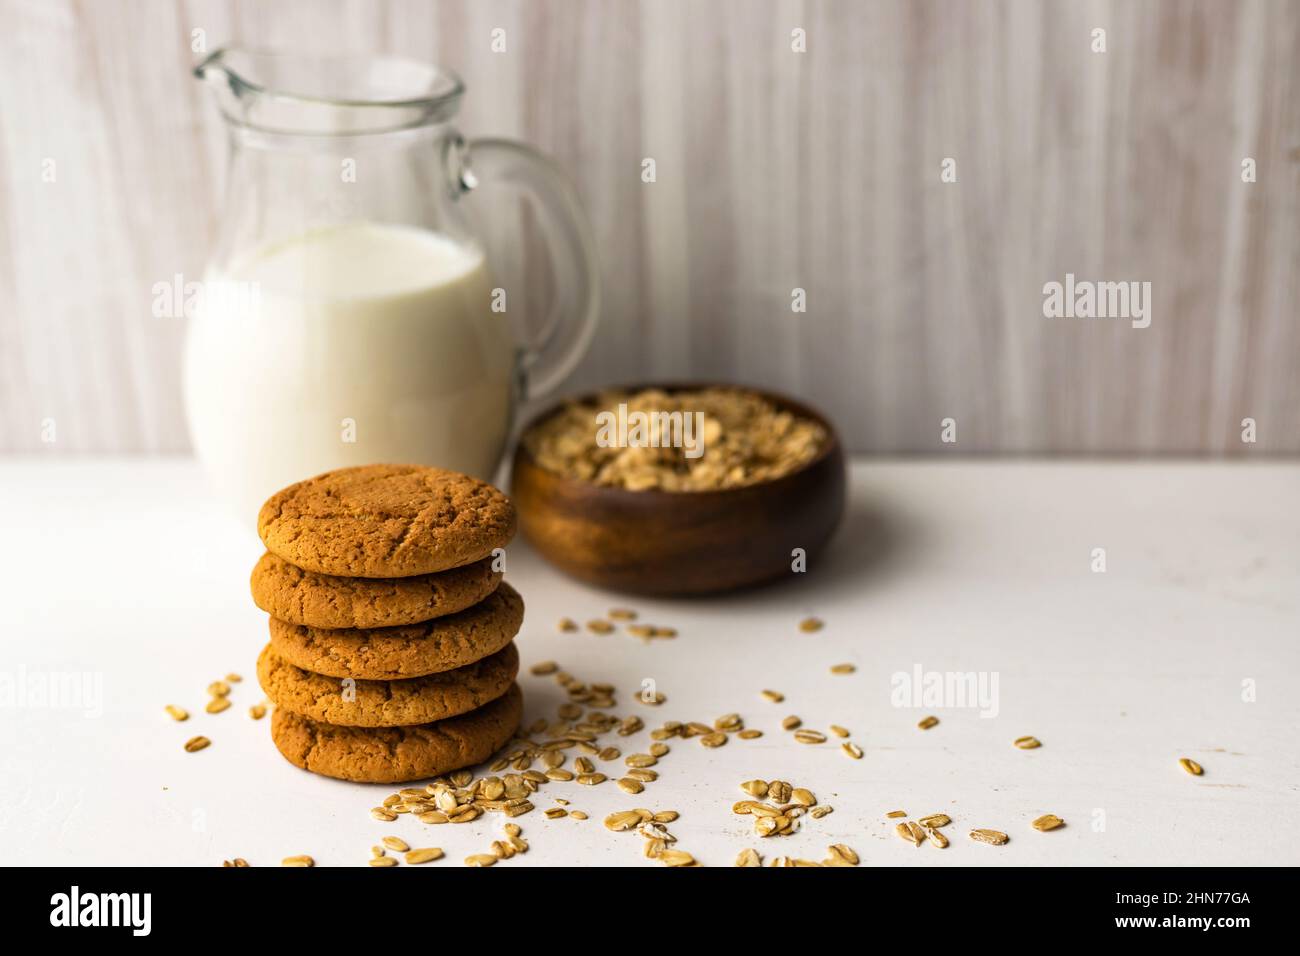 Heap oatmeal cookies and oat cereal flakes bowl on white table on milk glass jug background Stock Photo